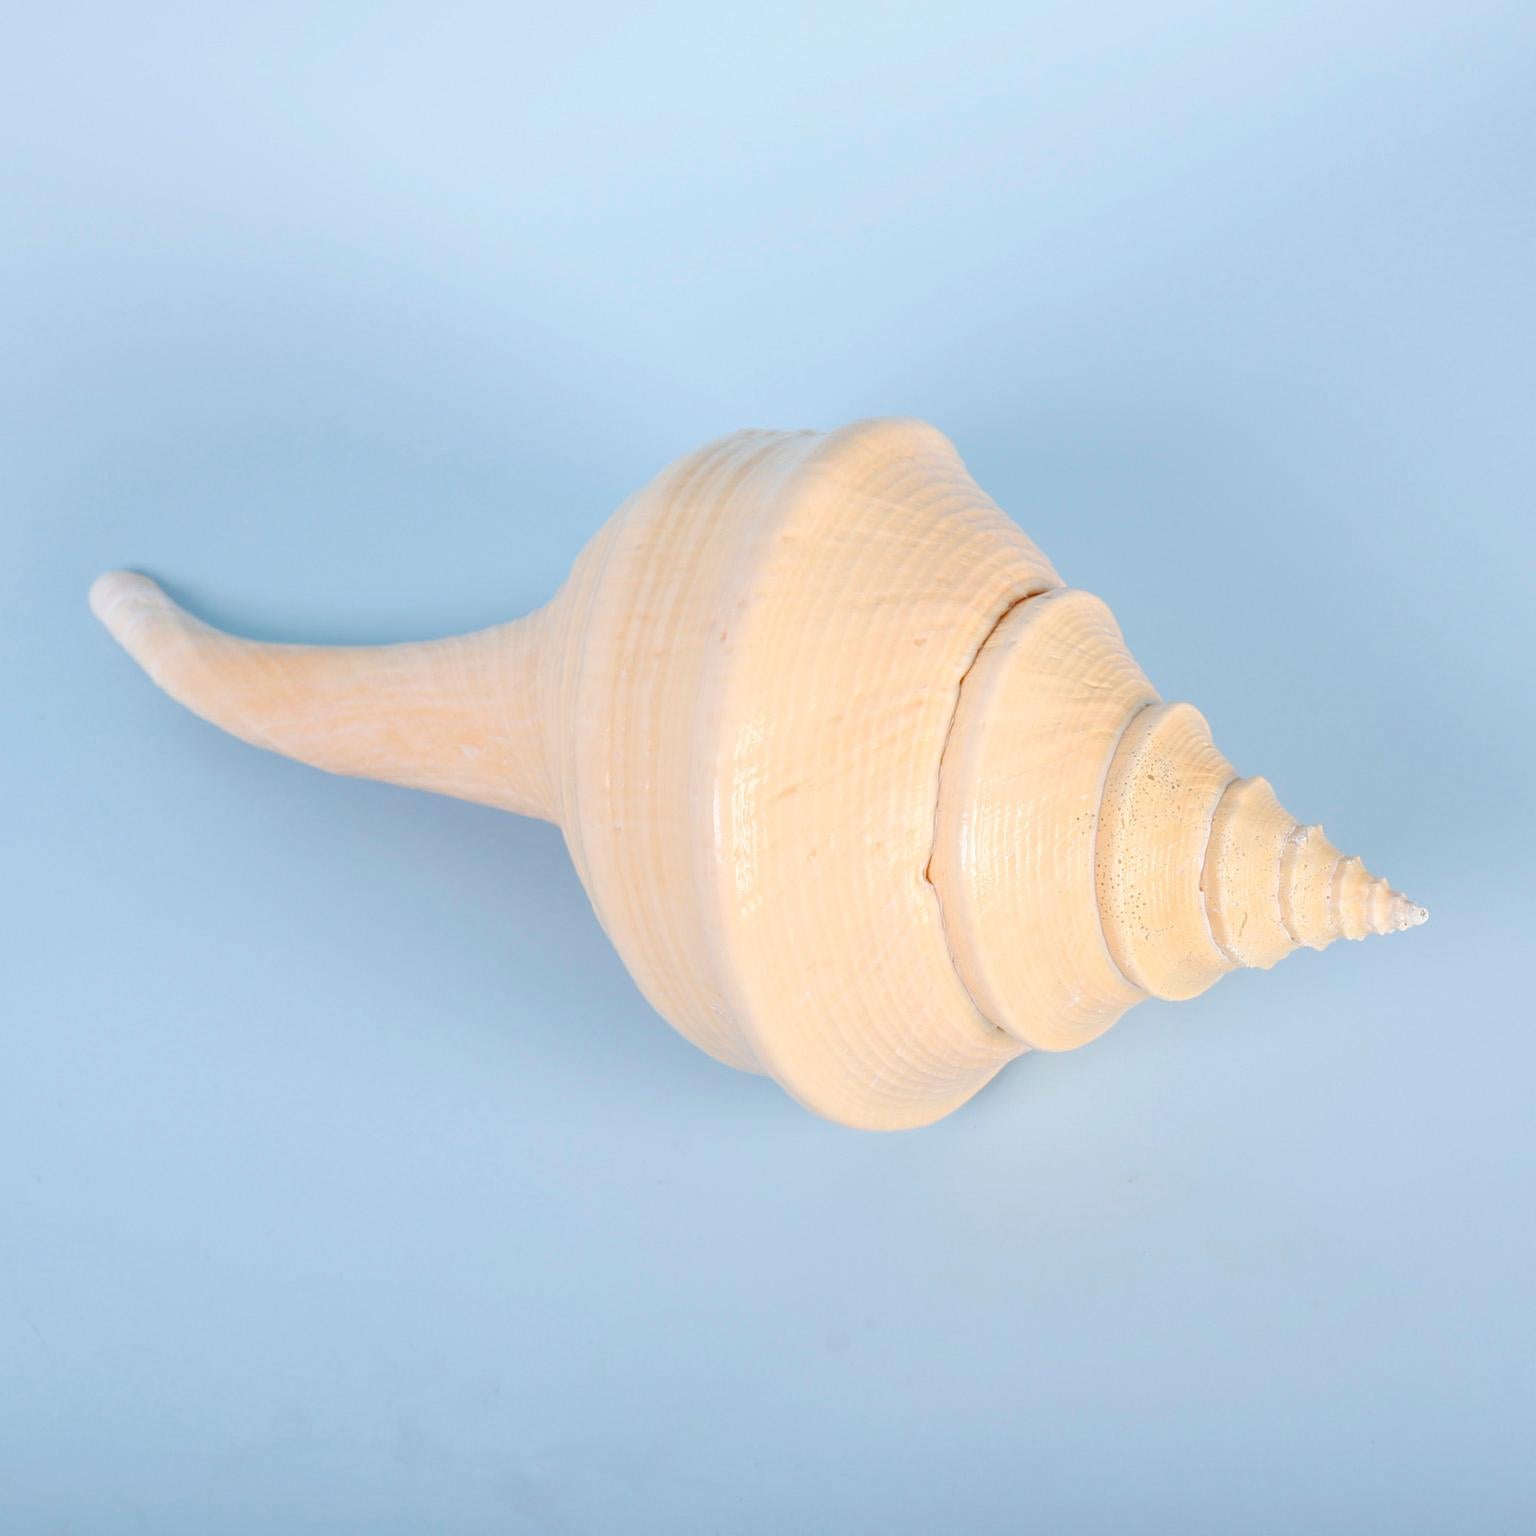 Super sized Syrinx Aranus seashell specimen with a lovely peachy palette and sea inspired spiral growth pattern. Size and condition make this one a rare find.